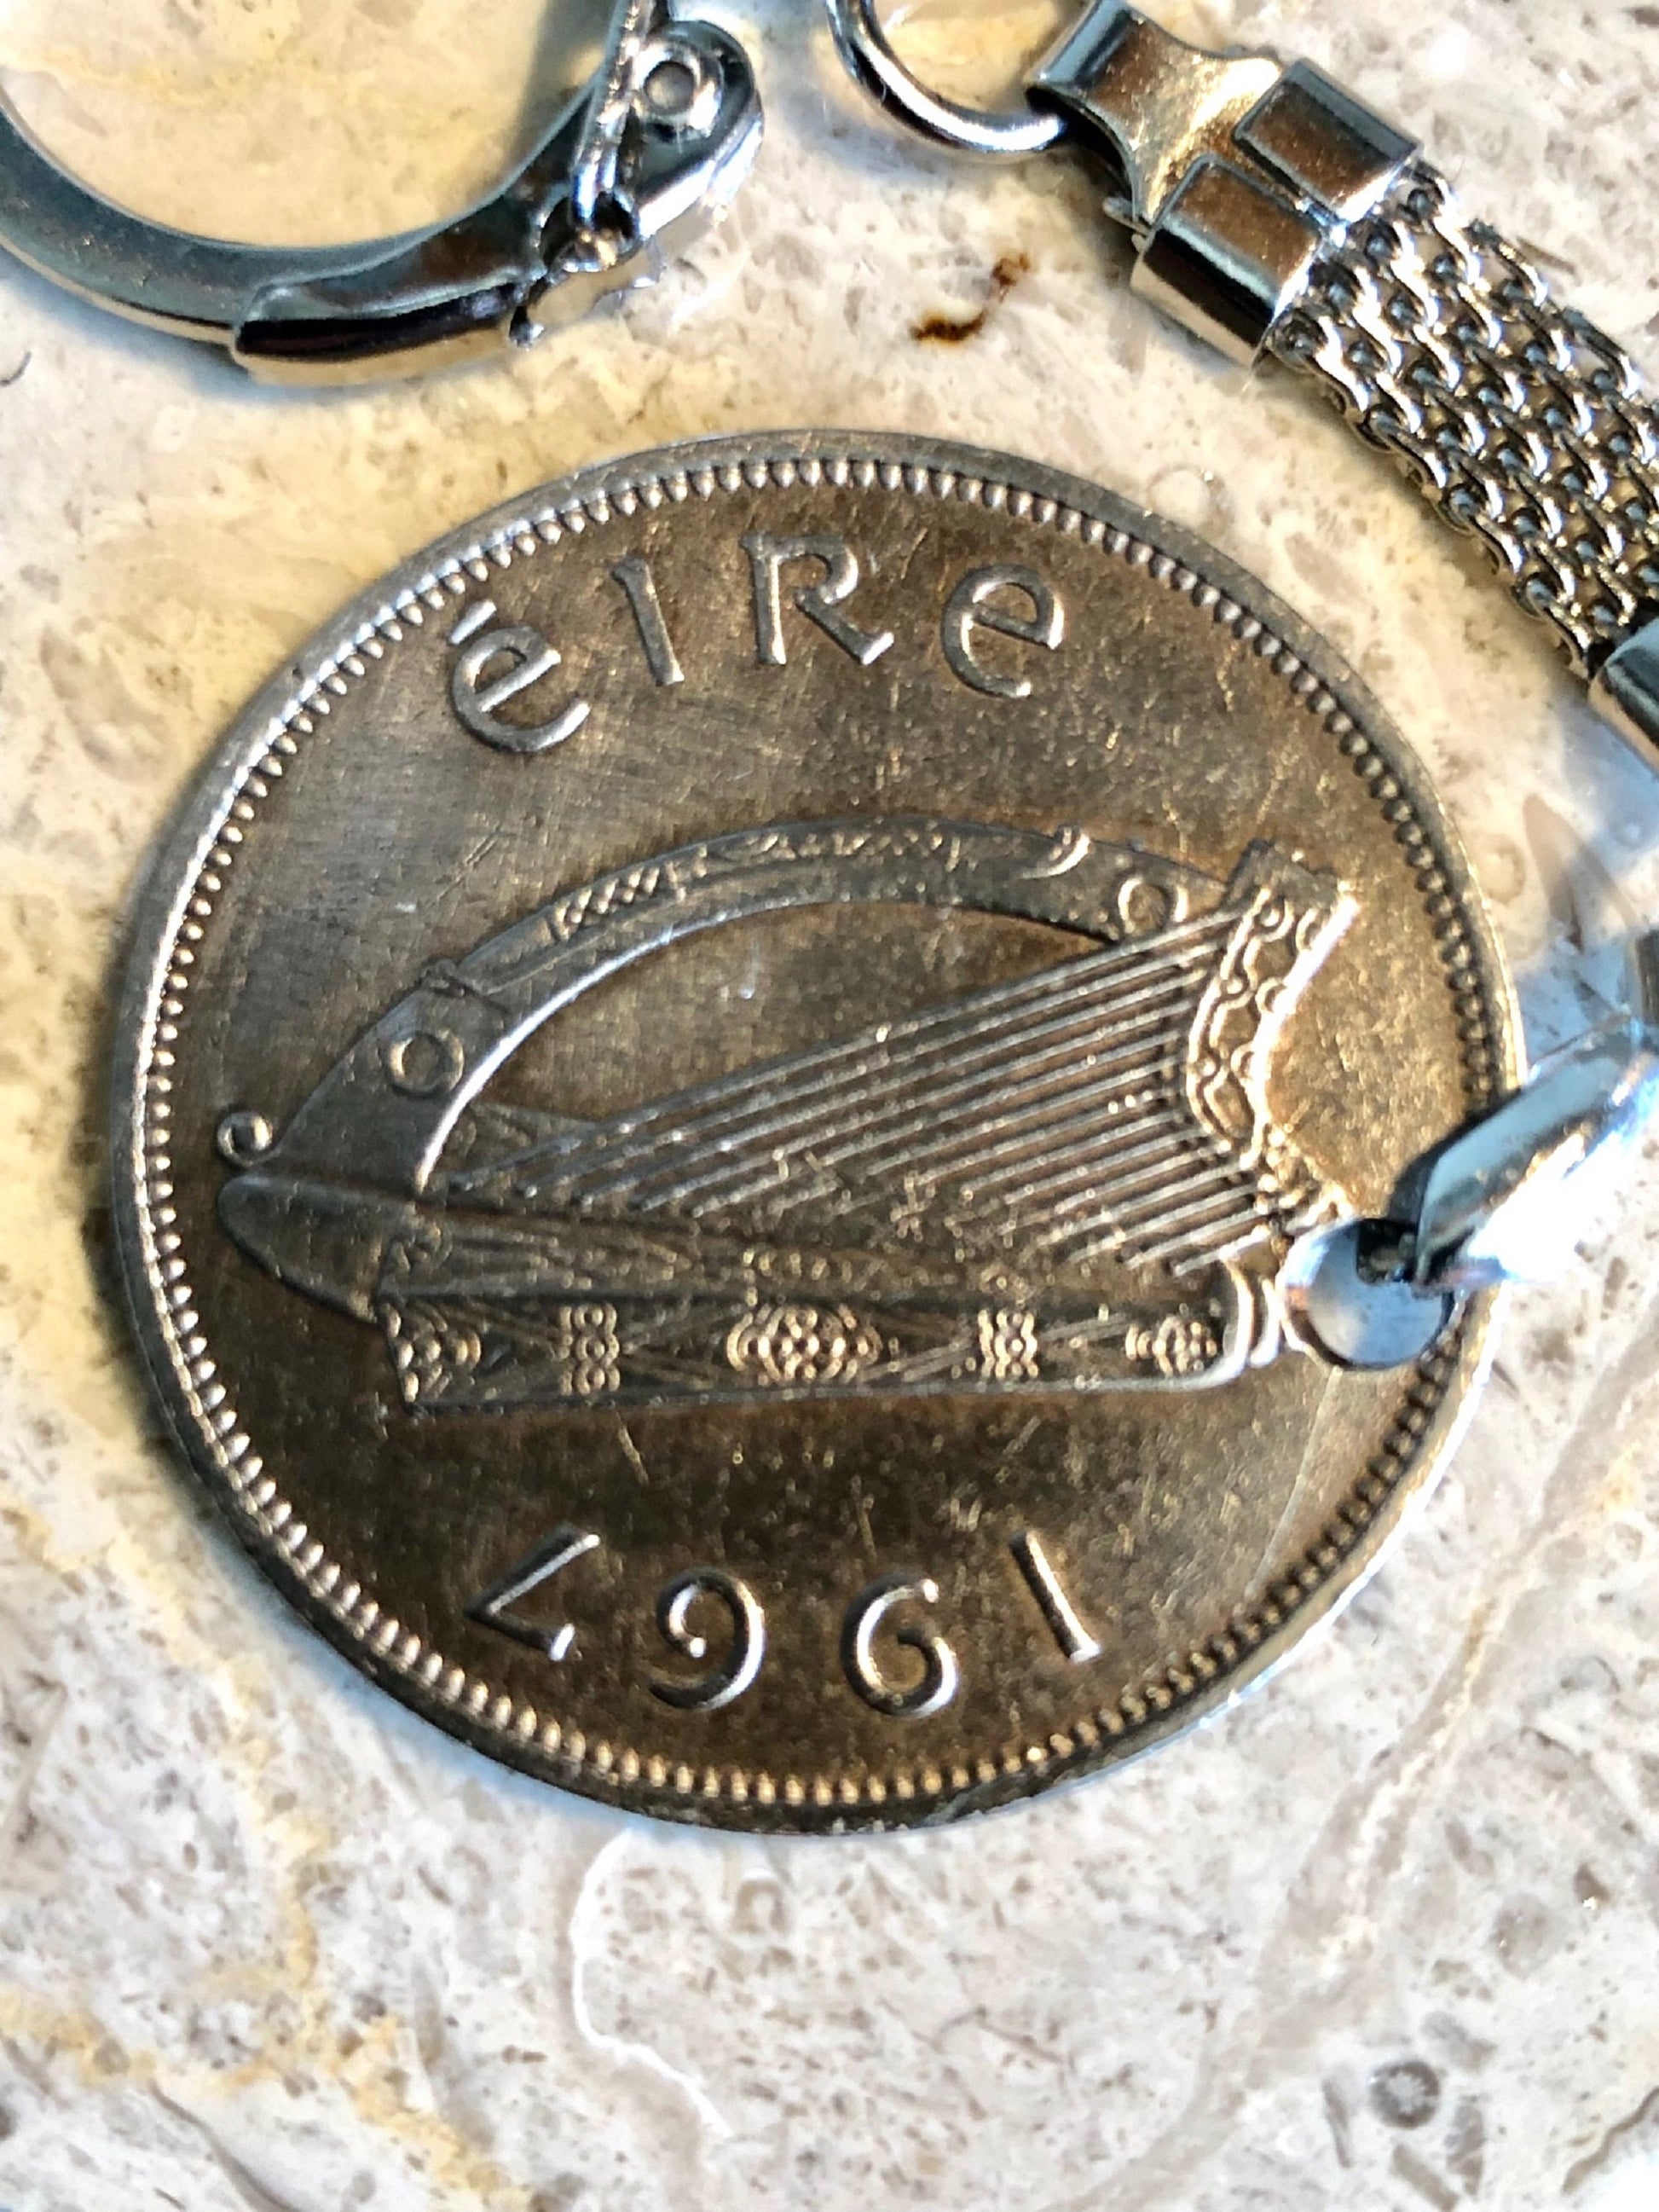 Ireland Coin Keychain Irish Half Crown Lear Harp Rare Find Celtic Vintage Antique Finished By Hand Personal & Limited Supply -